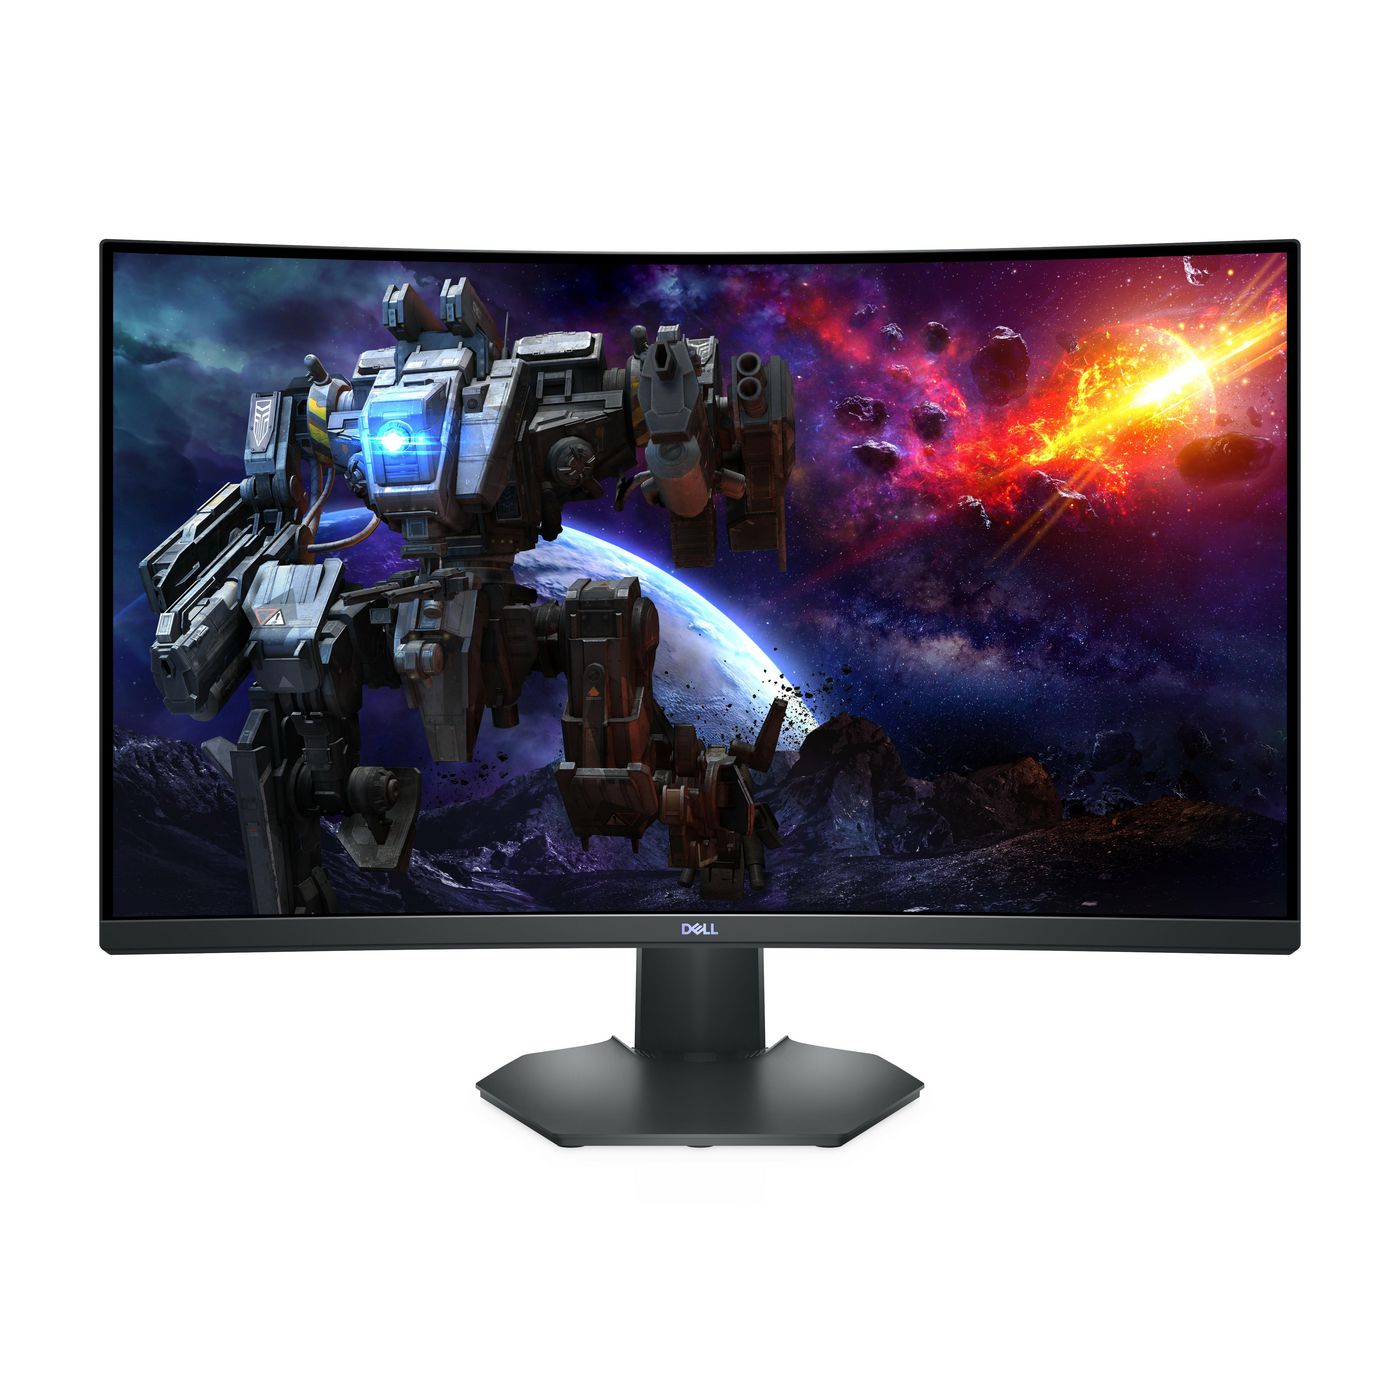 Curved Gaming Monitor 32 - S3222dgm - 2562x1440